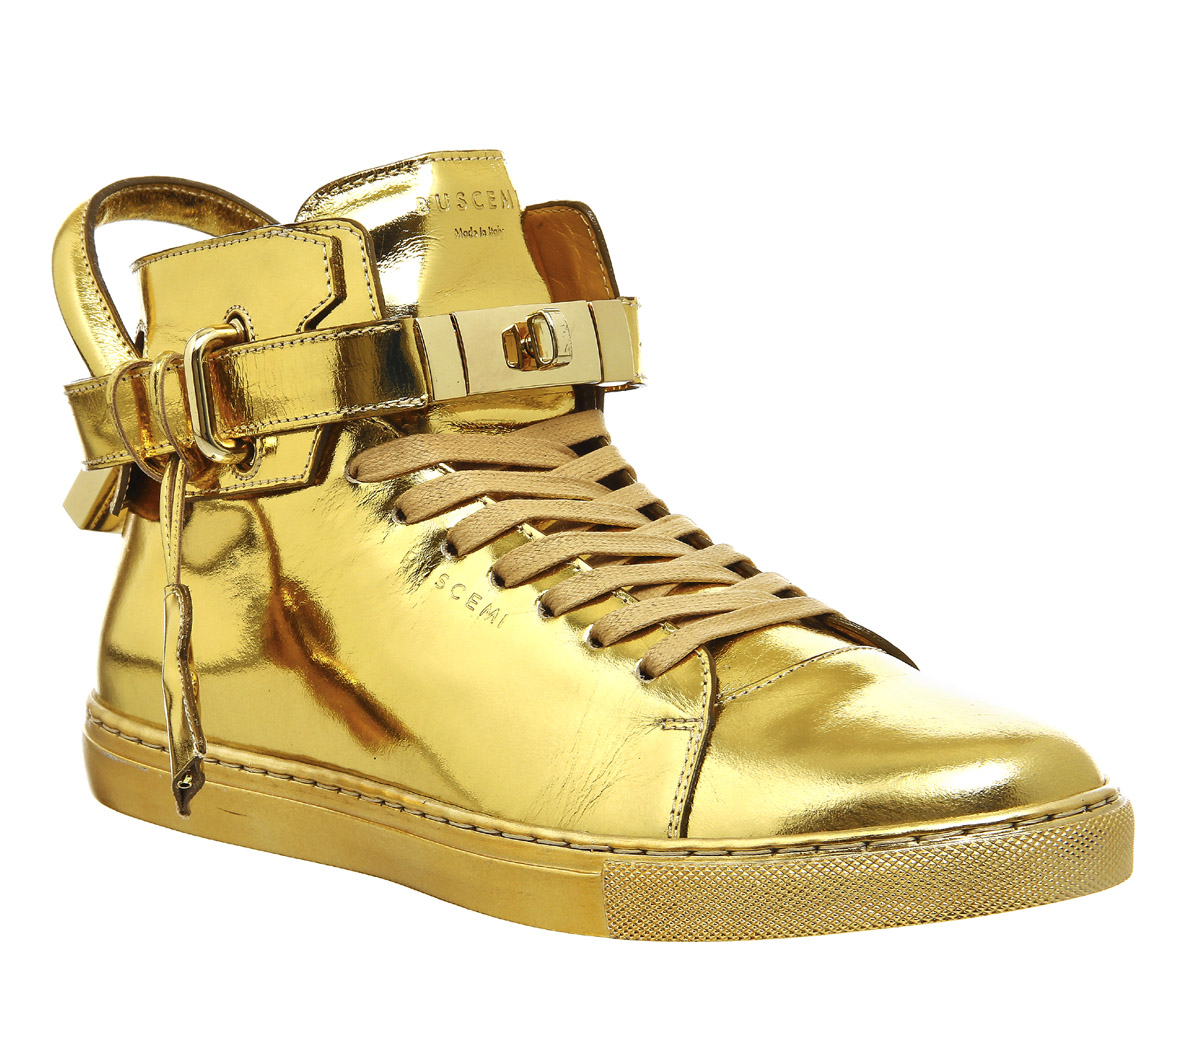 Buscemi 100mm Shoes Gold Metallic Leather - His trainers